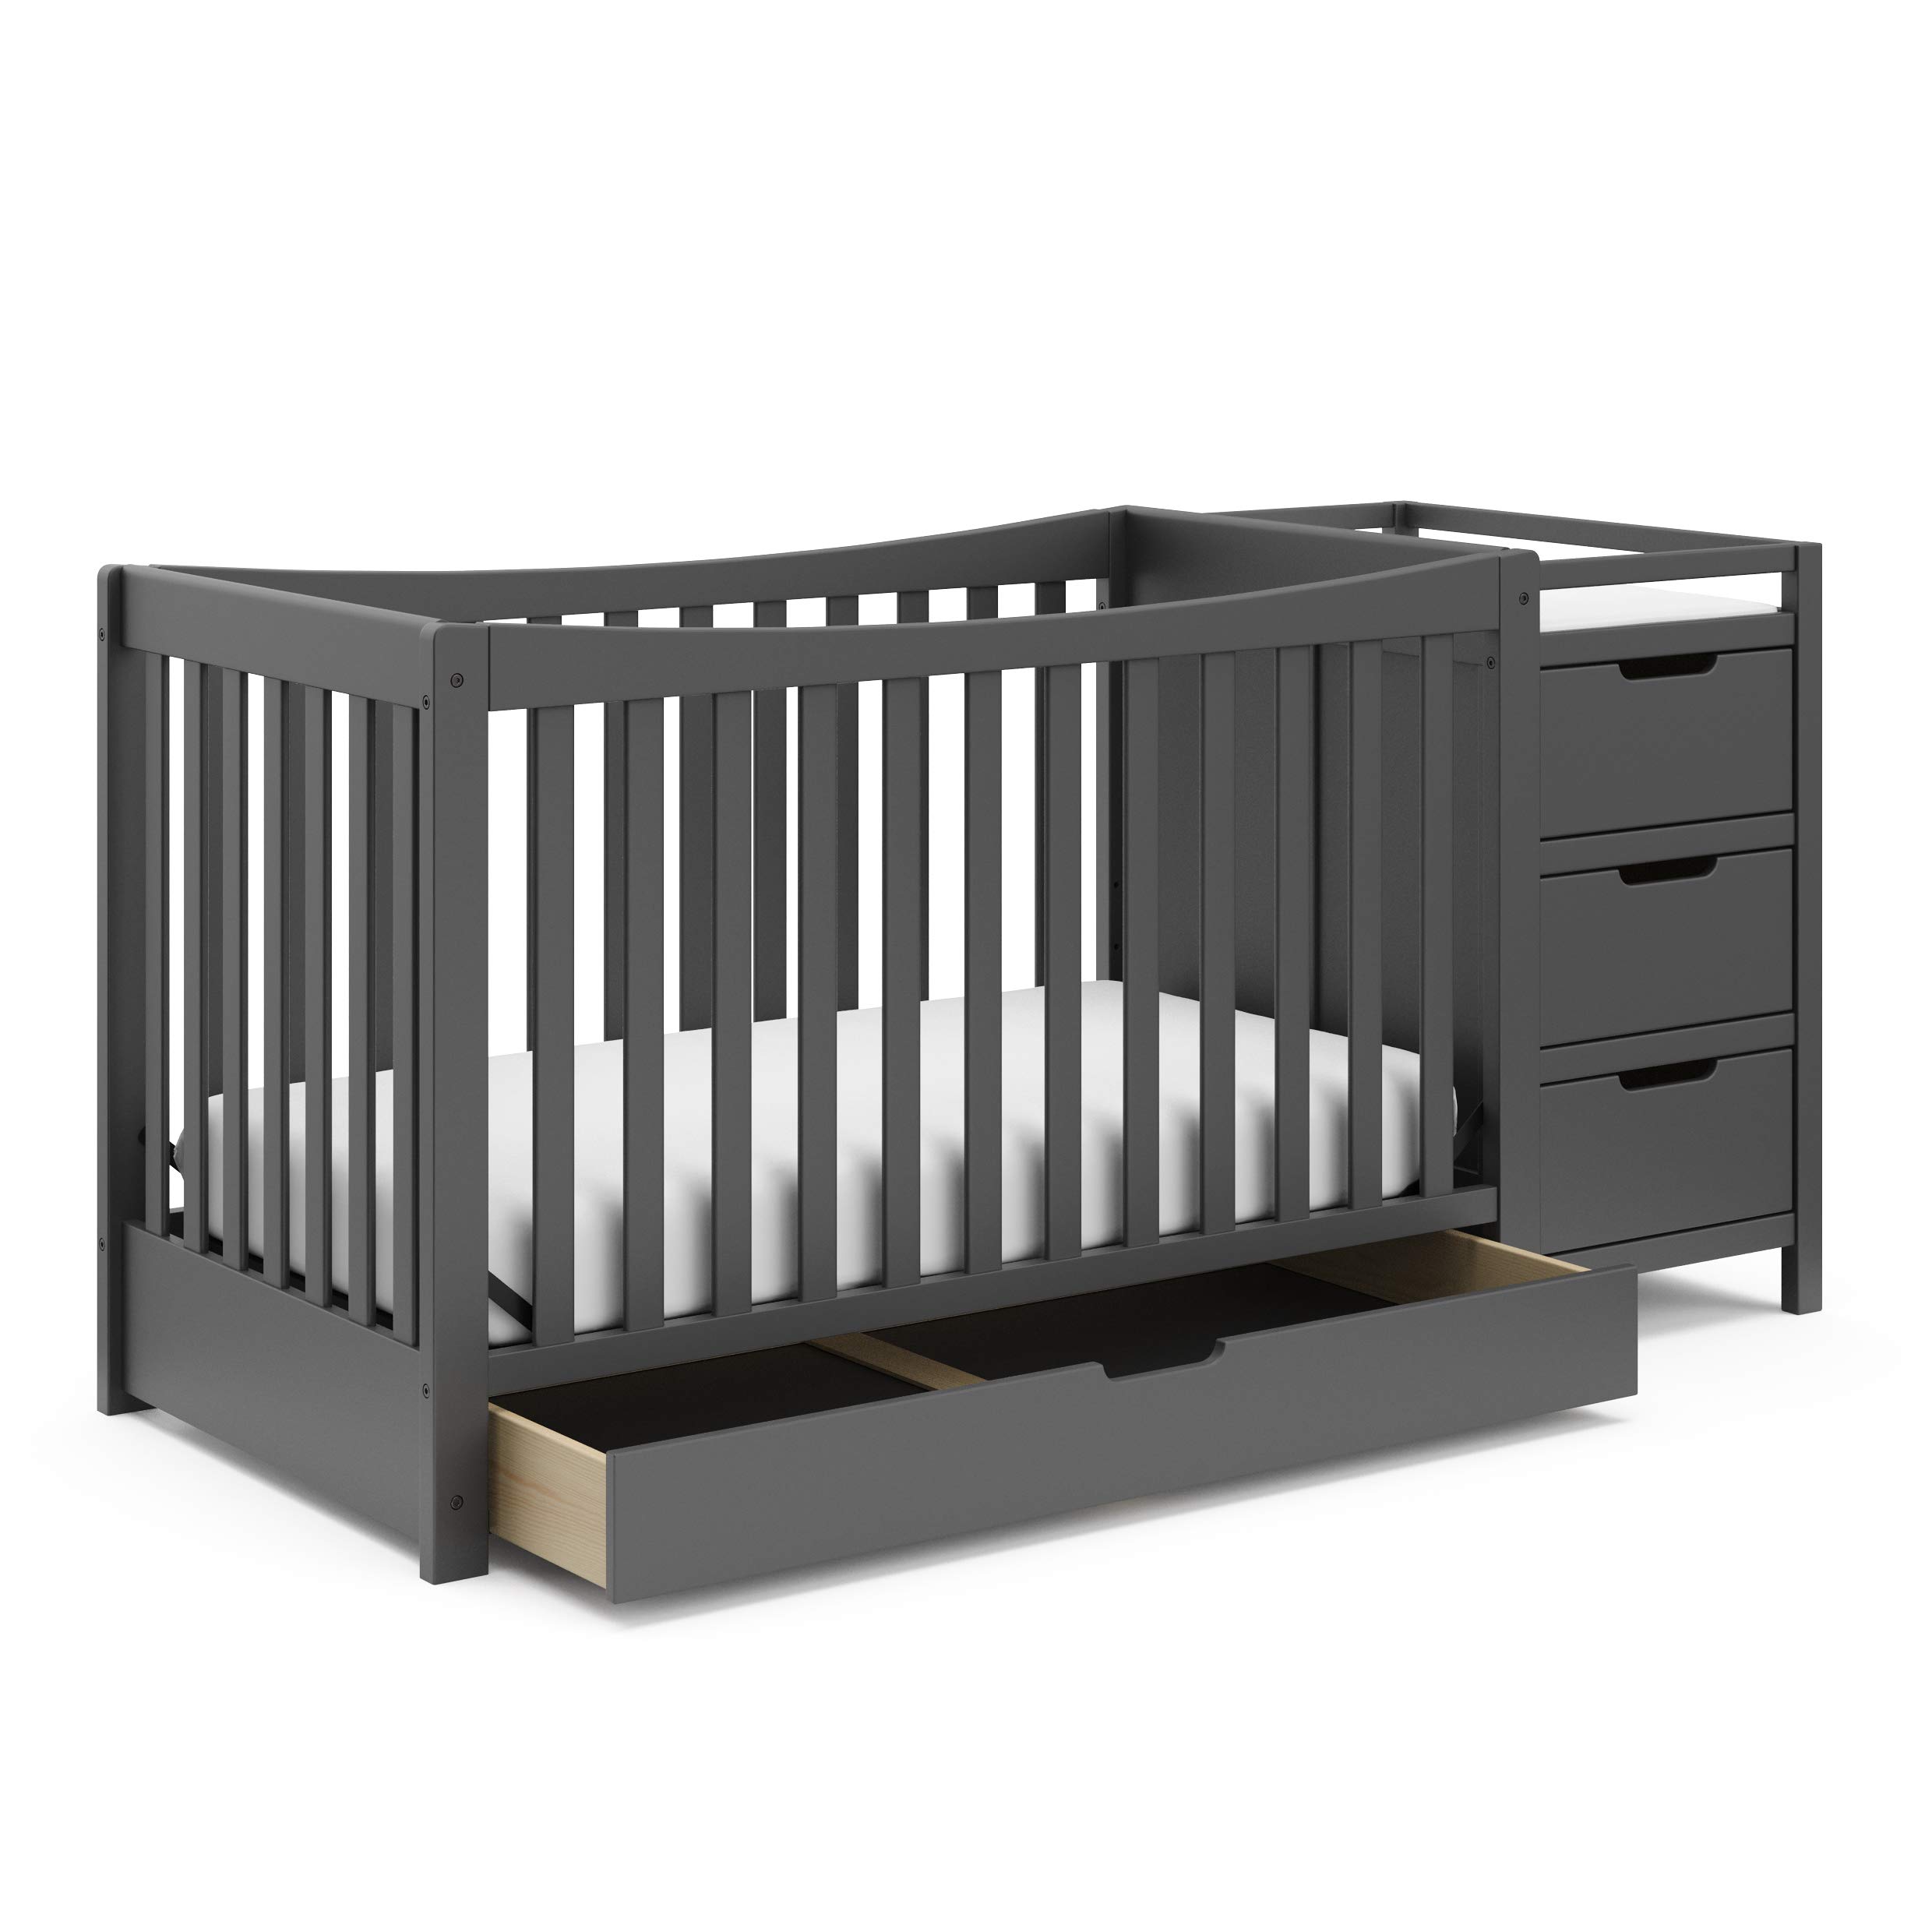 4-in-1 Graco Remi All-in-One Convertible Crib w/ 3 Storage Drawers & Changer (Various Colors) $299 + Free Shipping